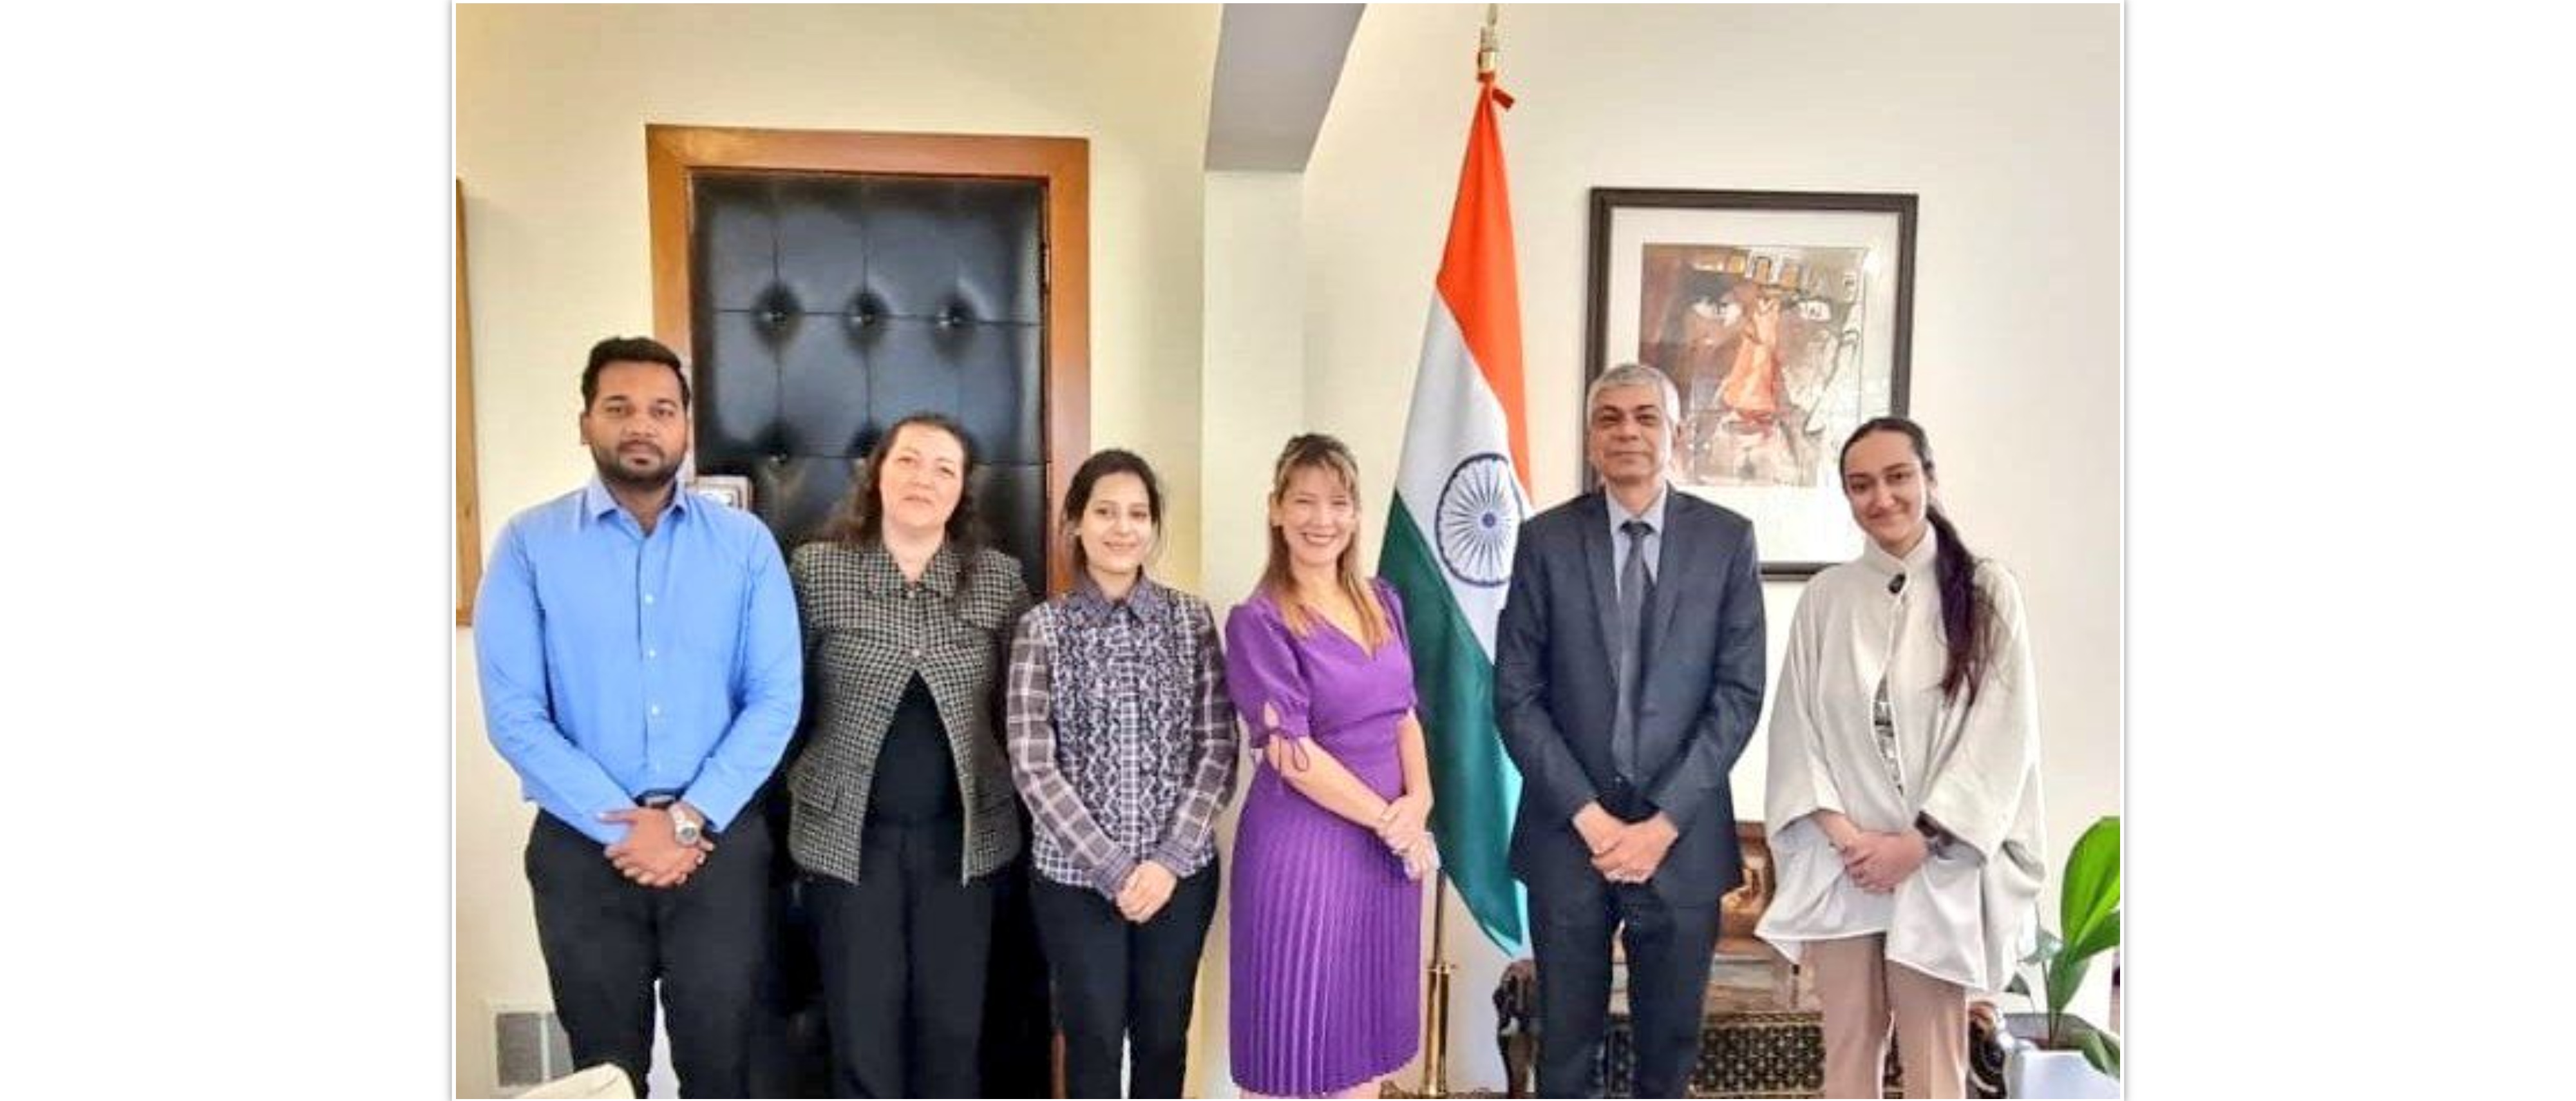  <div style="fcolor: #fff; font-weight: 600; font-size: 1.5em;">
<p style="font-size: 13.8px;">Ambassador Pankaj Sharma and Embassy officers had a meeting with Director of Minar India tourism,  Ms. Ruhani Duggal and officials from TravelCbrand Ms. Carla Guerrero & Ms. Karen Marin.

Discussed the tourism potential between India and México and the ways of enhancing the same.

<br /><span style="text-align: center;">07 November 2022</span></p>
</div>